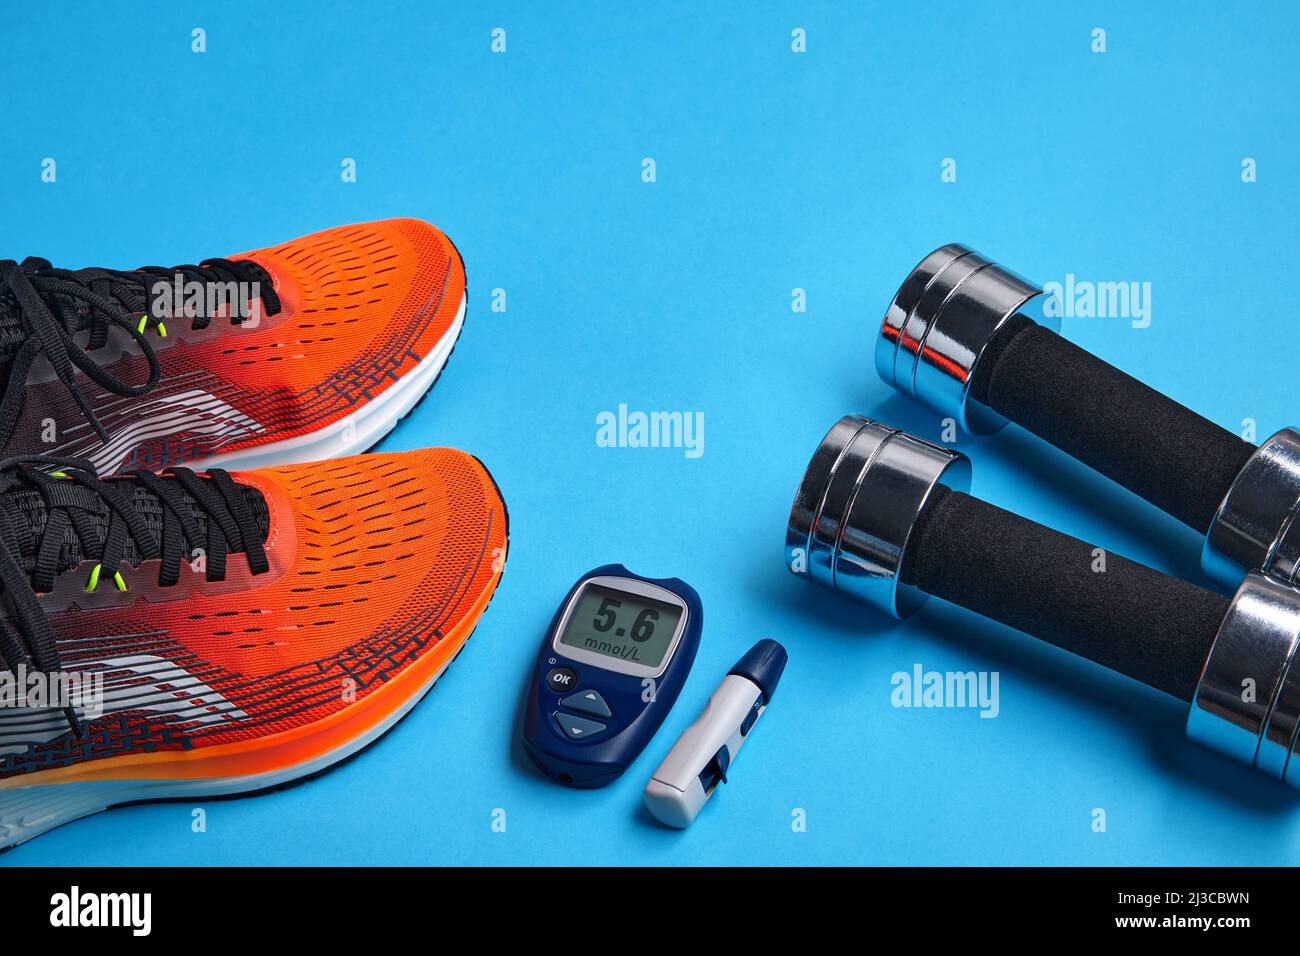 Orange sneakers, metal dumbbells and a blood glucose meter on a blue background. Exercise to overcome insulin resistance Stock Photo